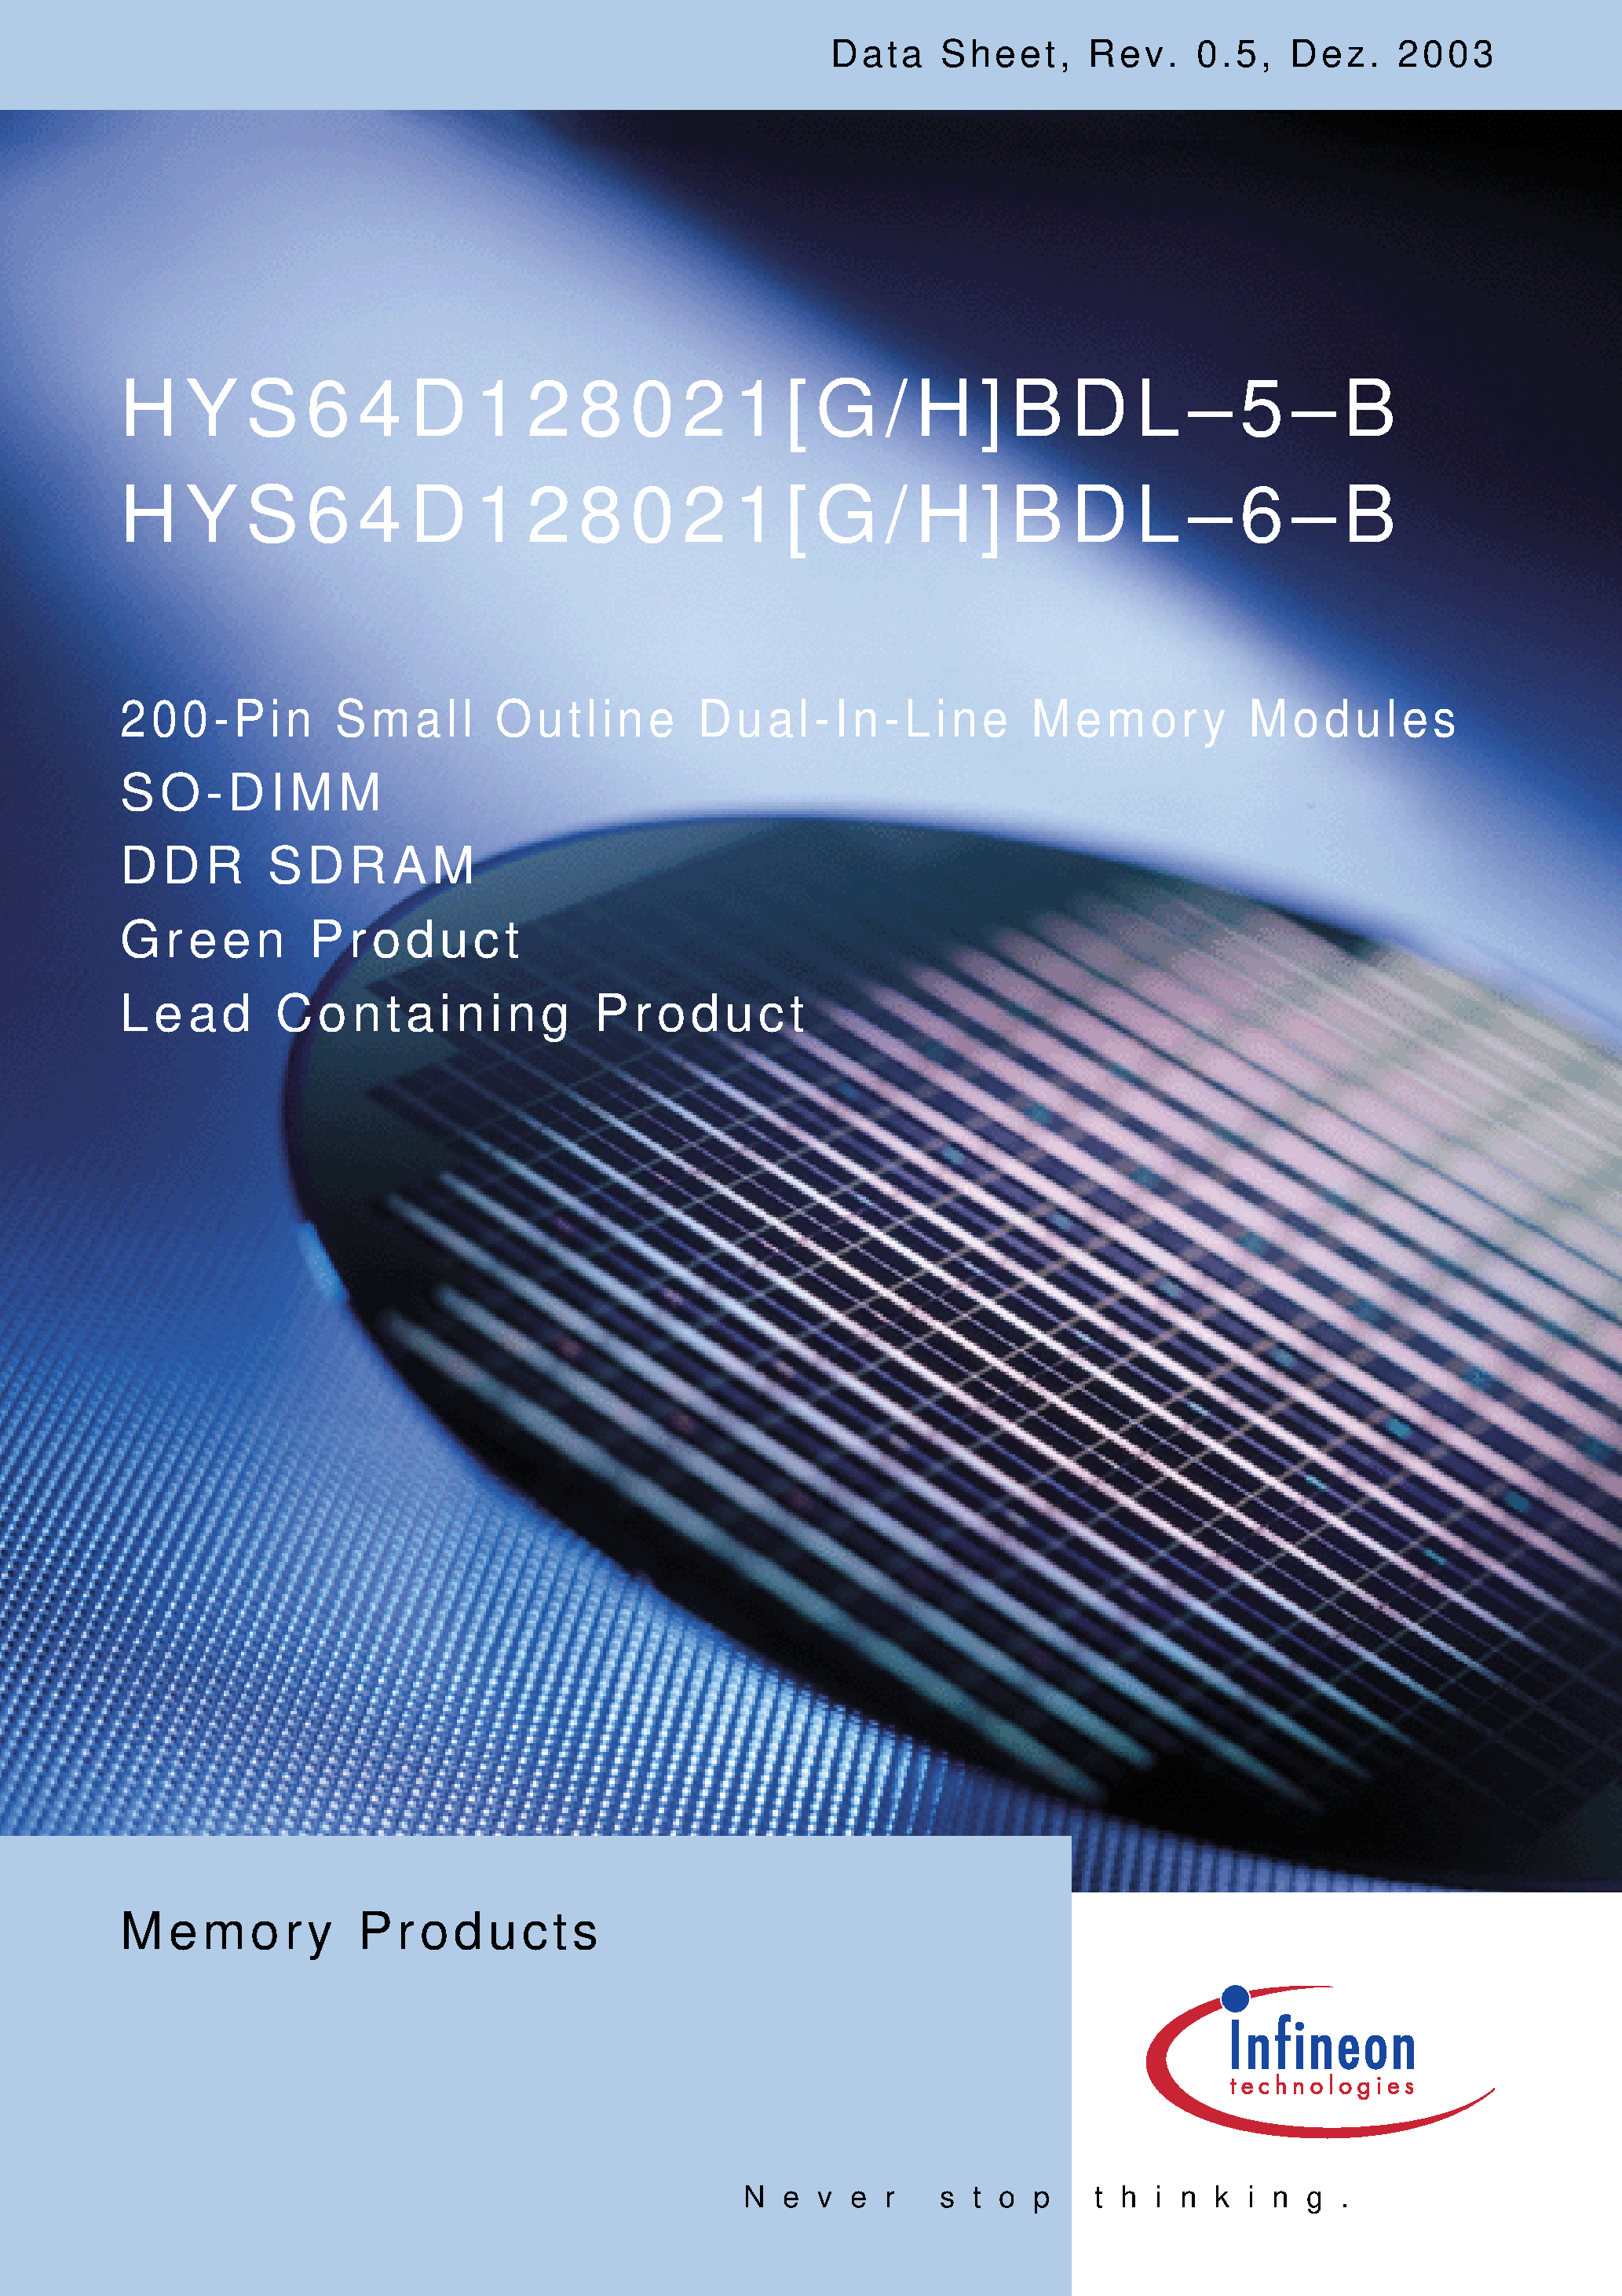 Даташит HYS64D128021HBDL-6-B - 200-Pin Small Outline Dual-In-Line Memory Modules страница 1